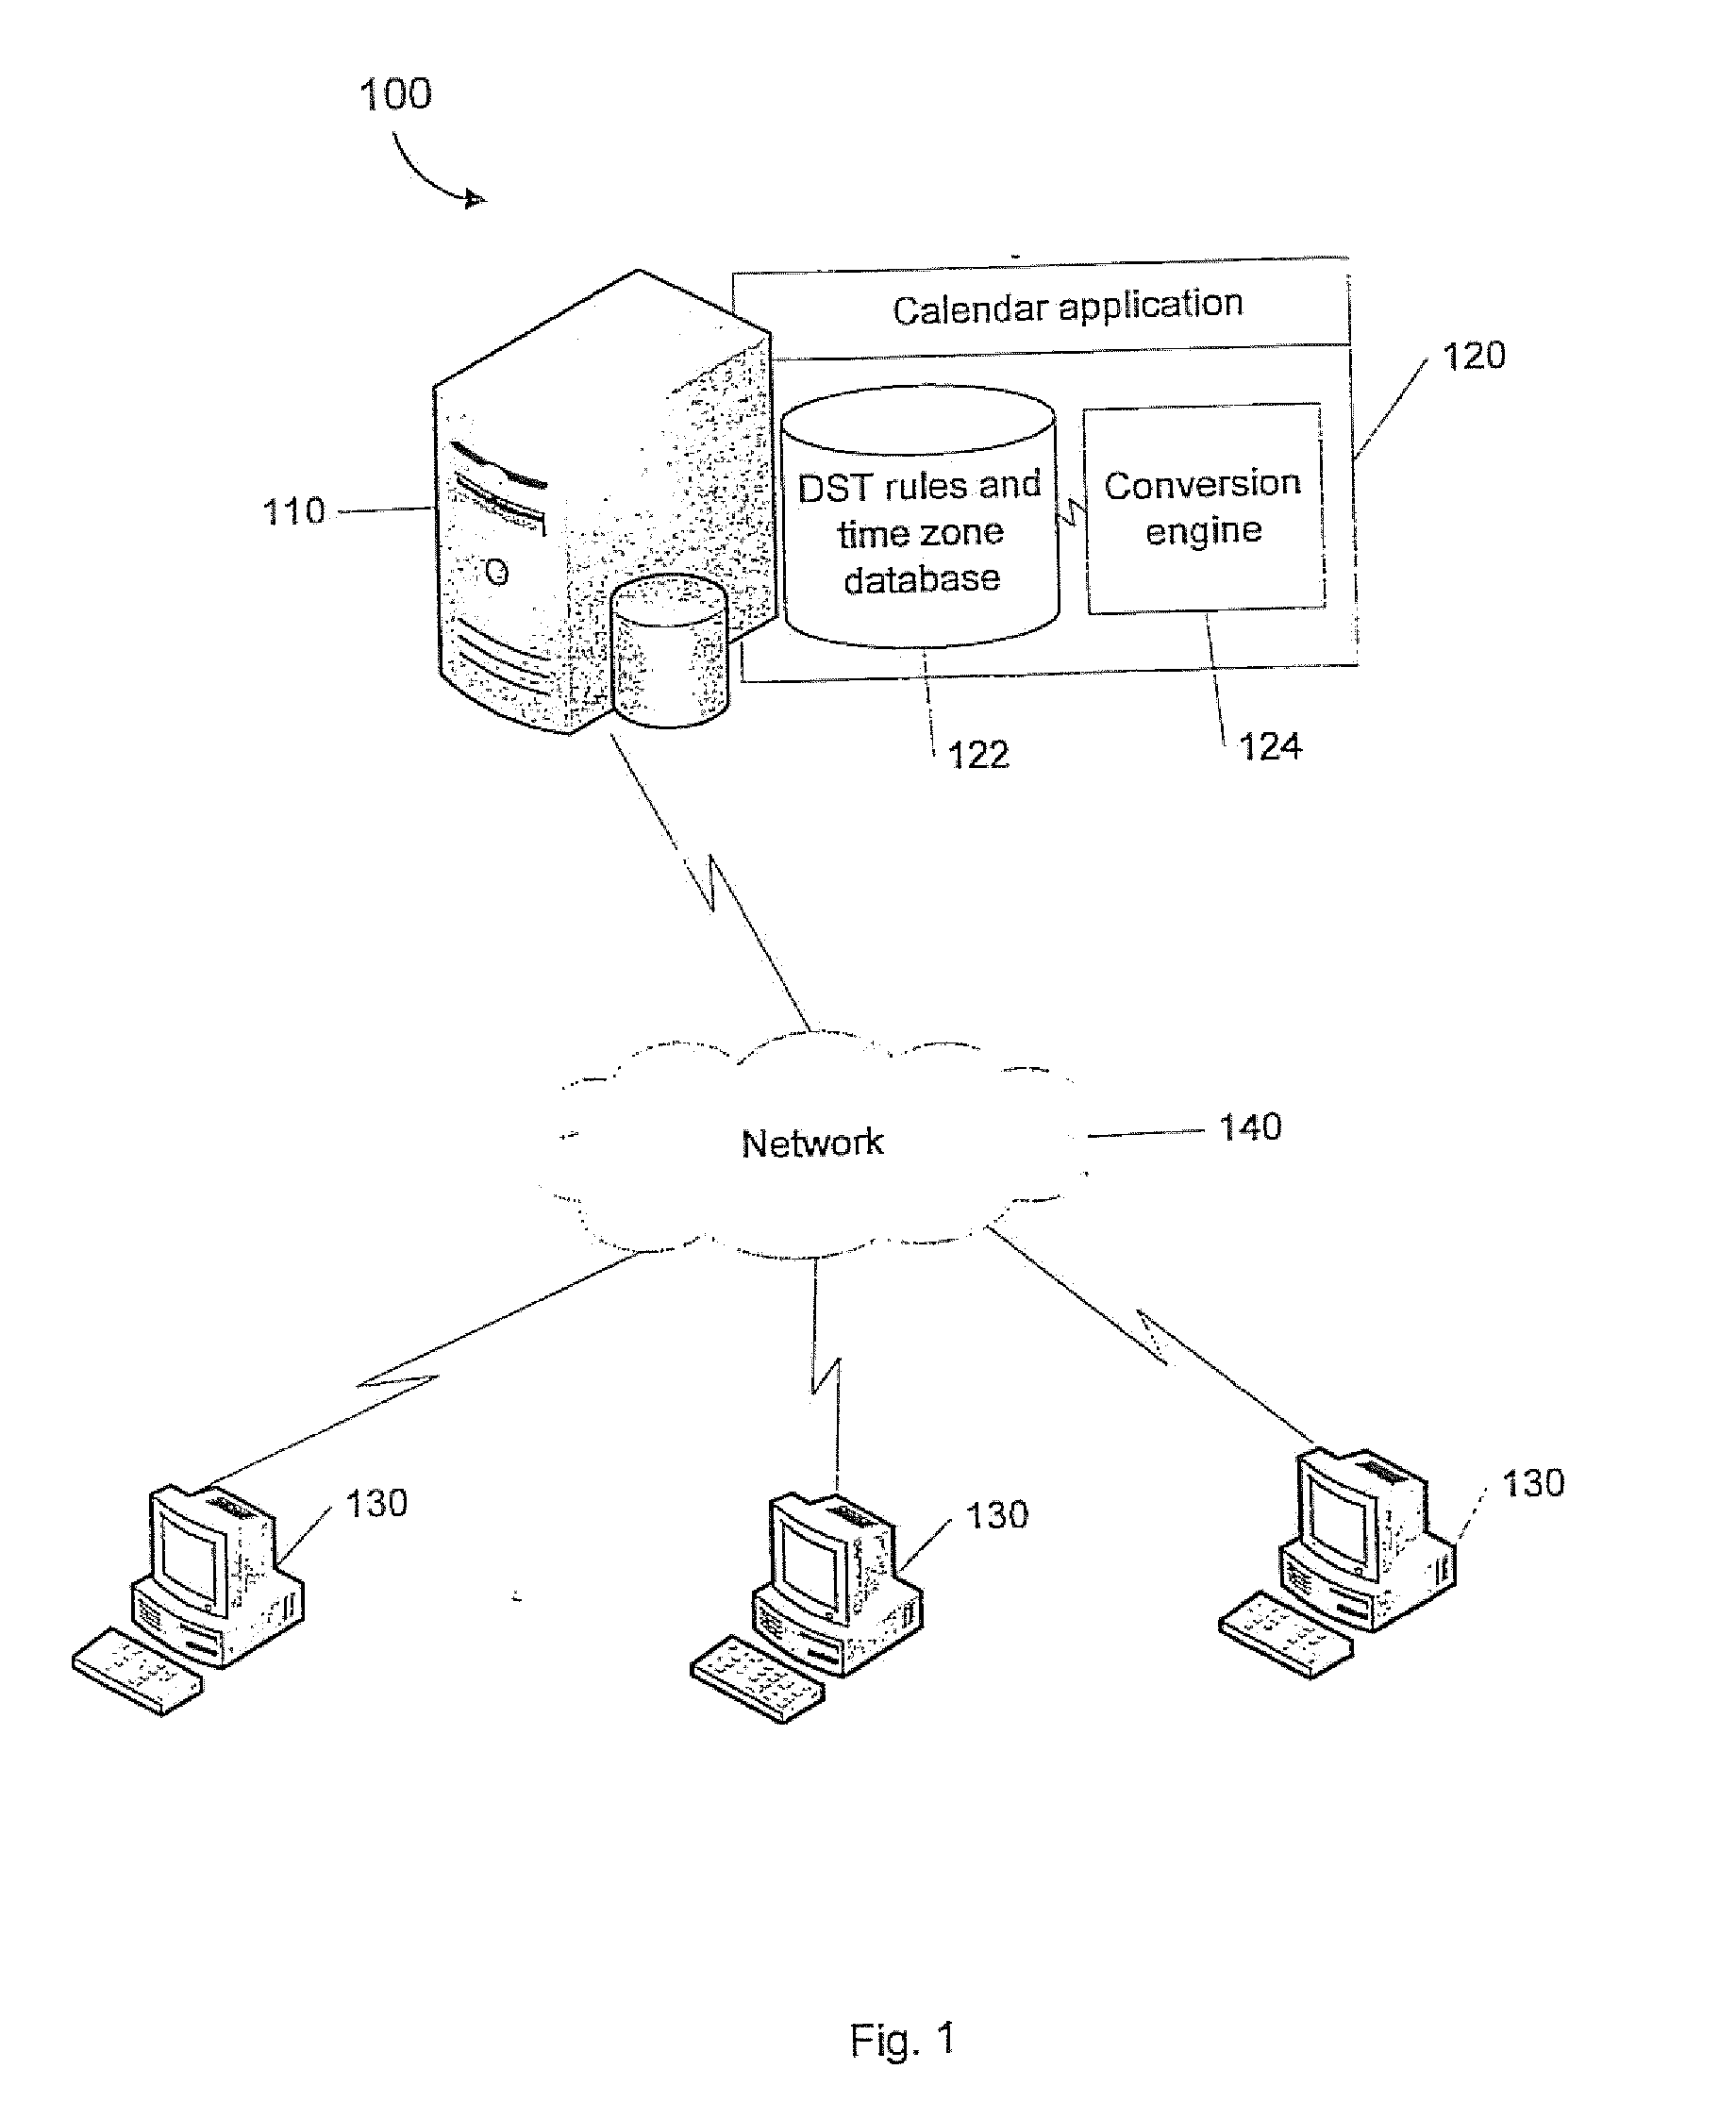 System and method for sharing a calendar over multiple geo-political regions